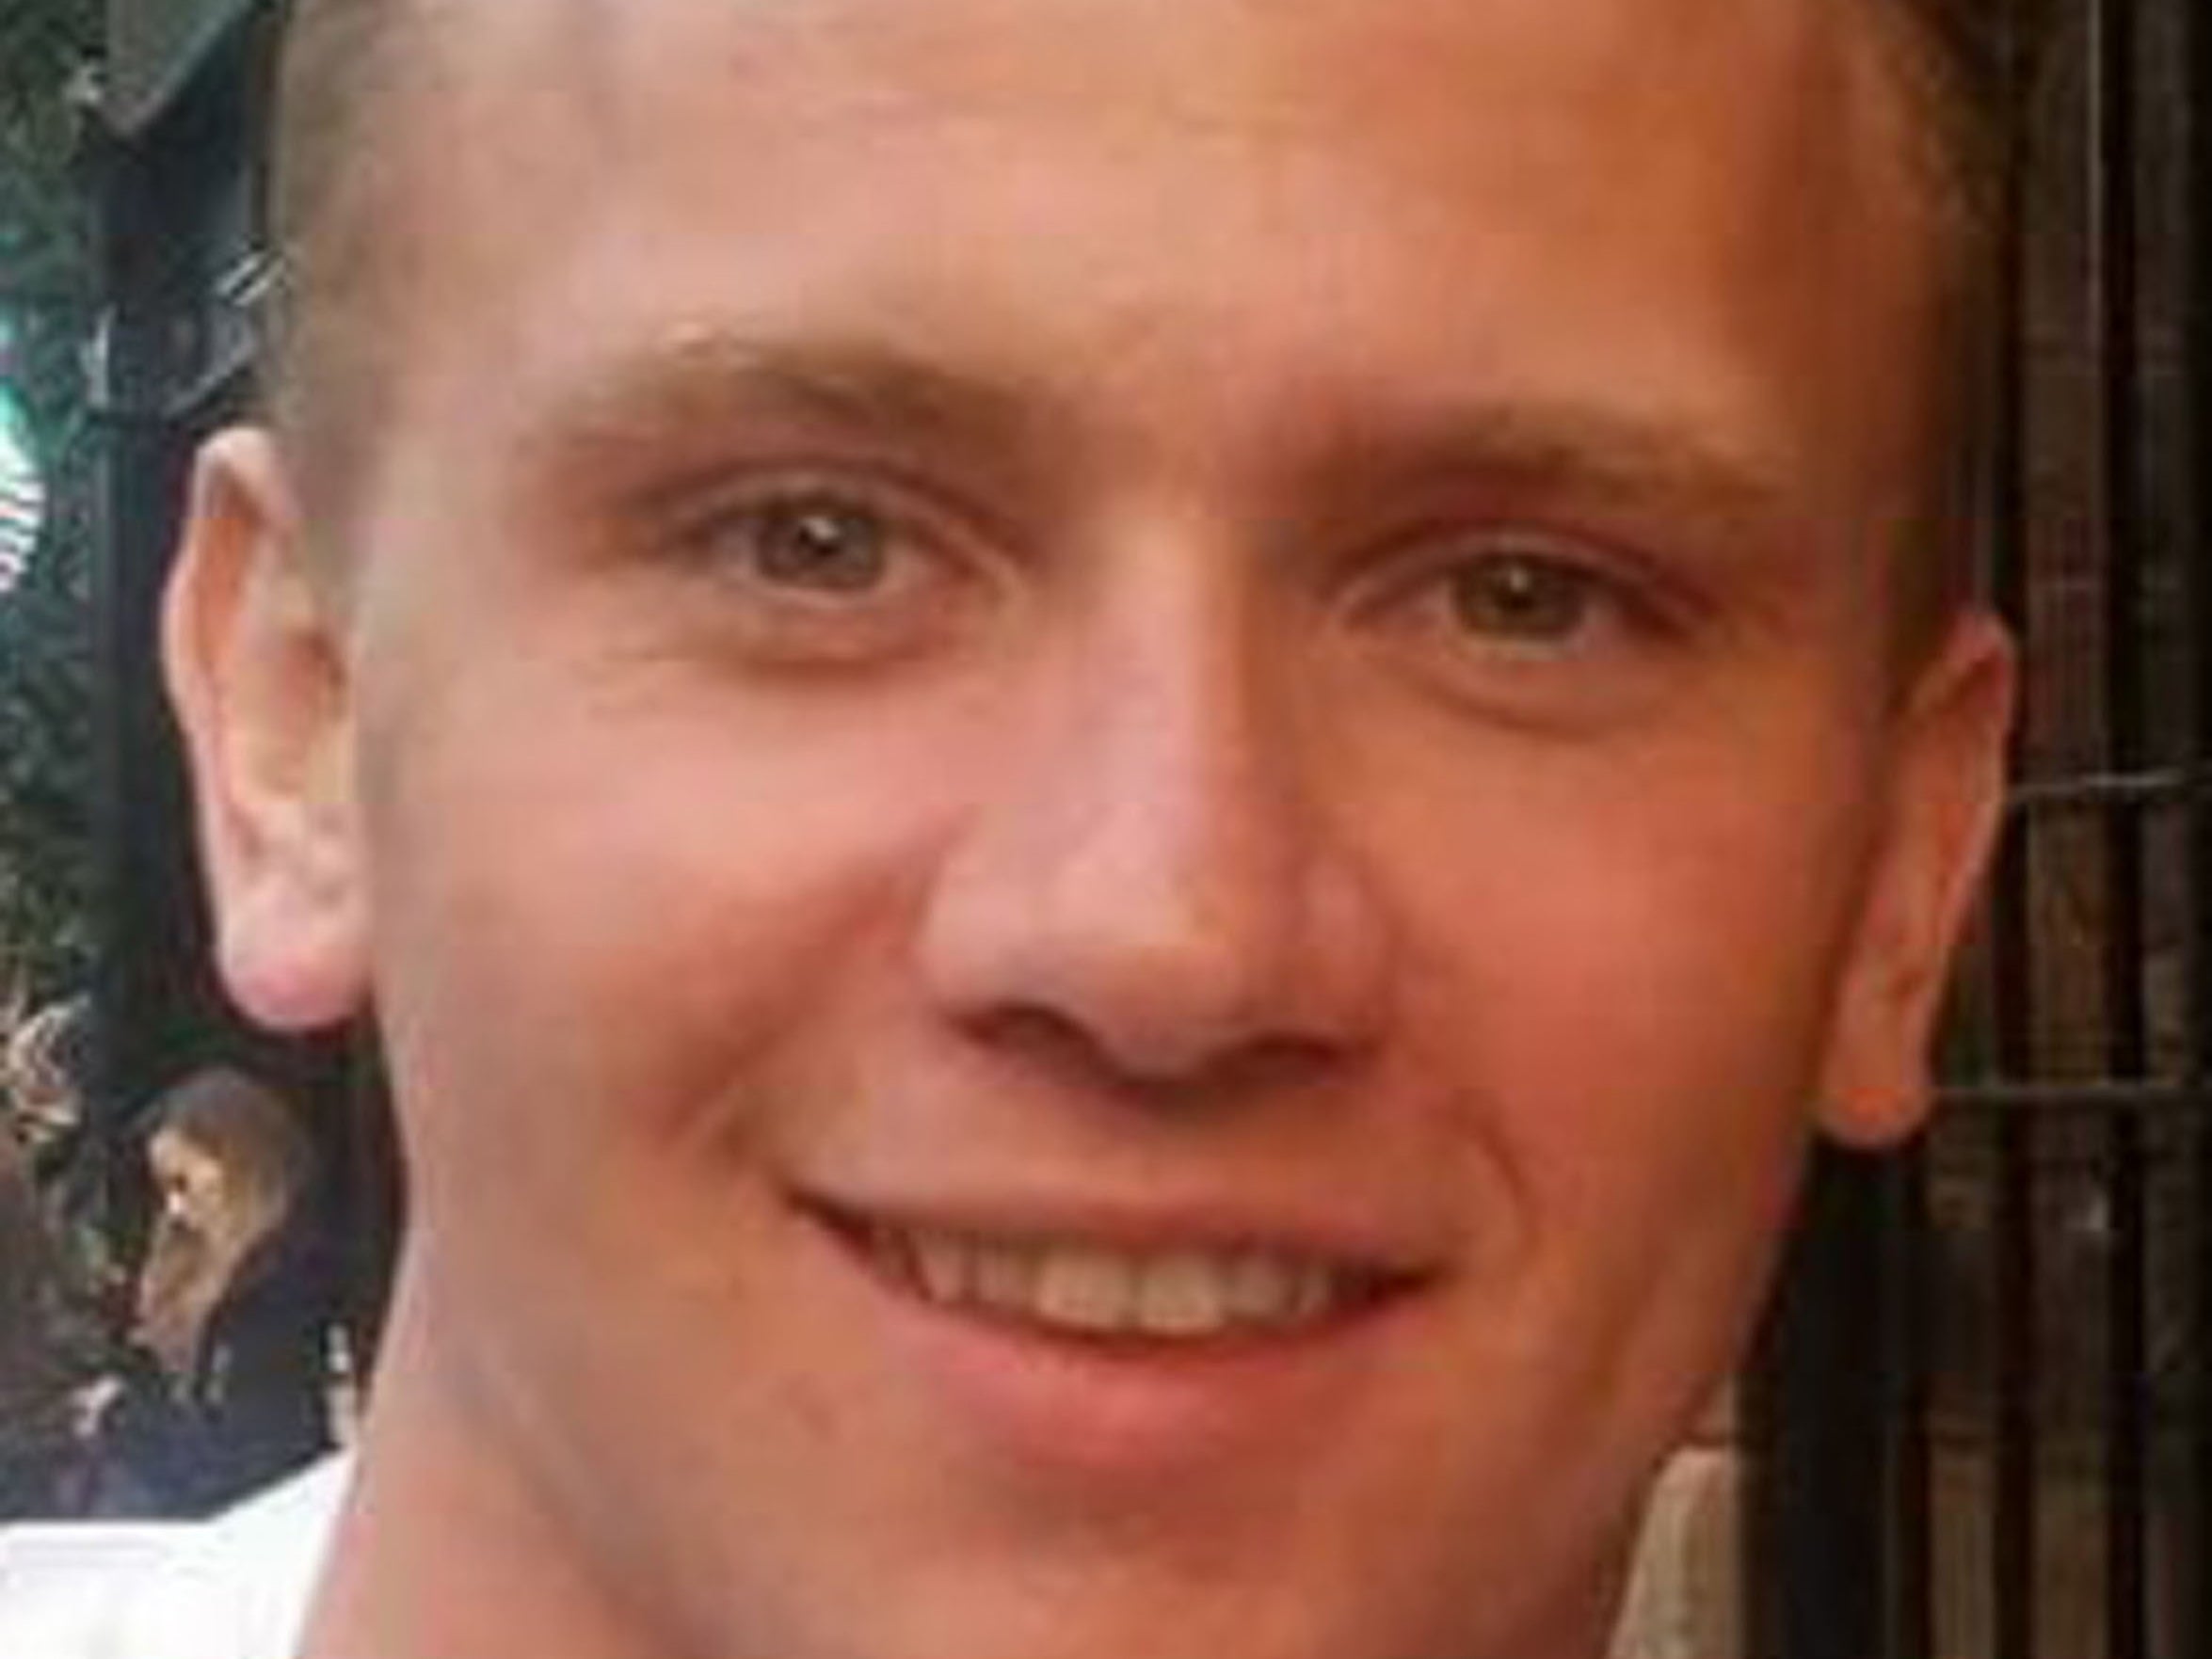 The inquest of missing RAF gunner Corrie McKeague has heard he developed a binge-drinking problem after finding a friend’s body on a railway track as a teenager